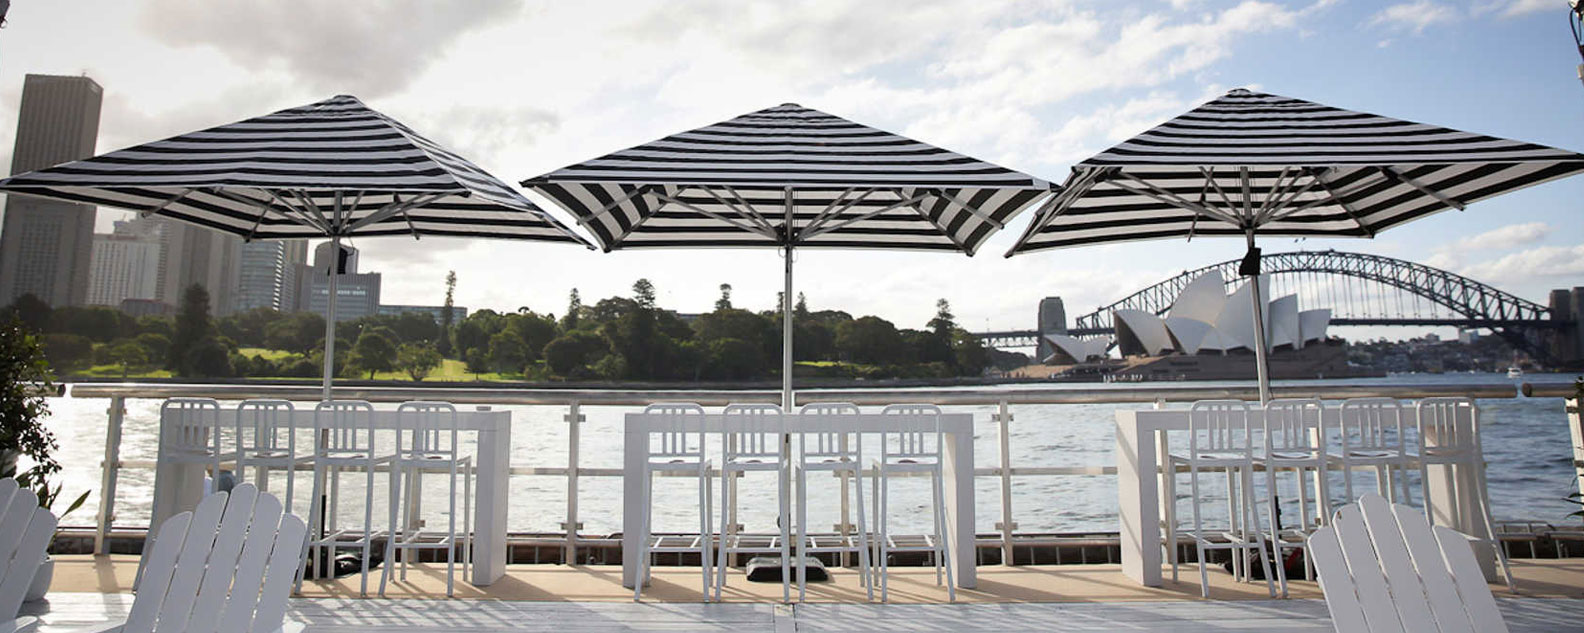 Three umbrellas at the harbourseide location, Fleet Steps in the Royal Botanic Garden Sydney, the Harbour Bridge is n the background.